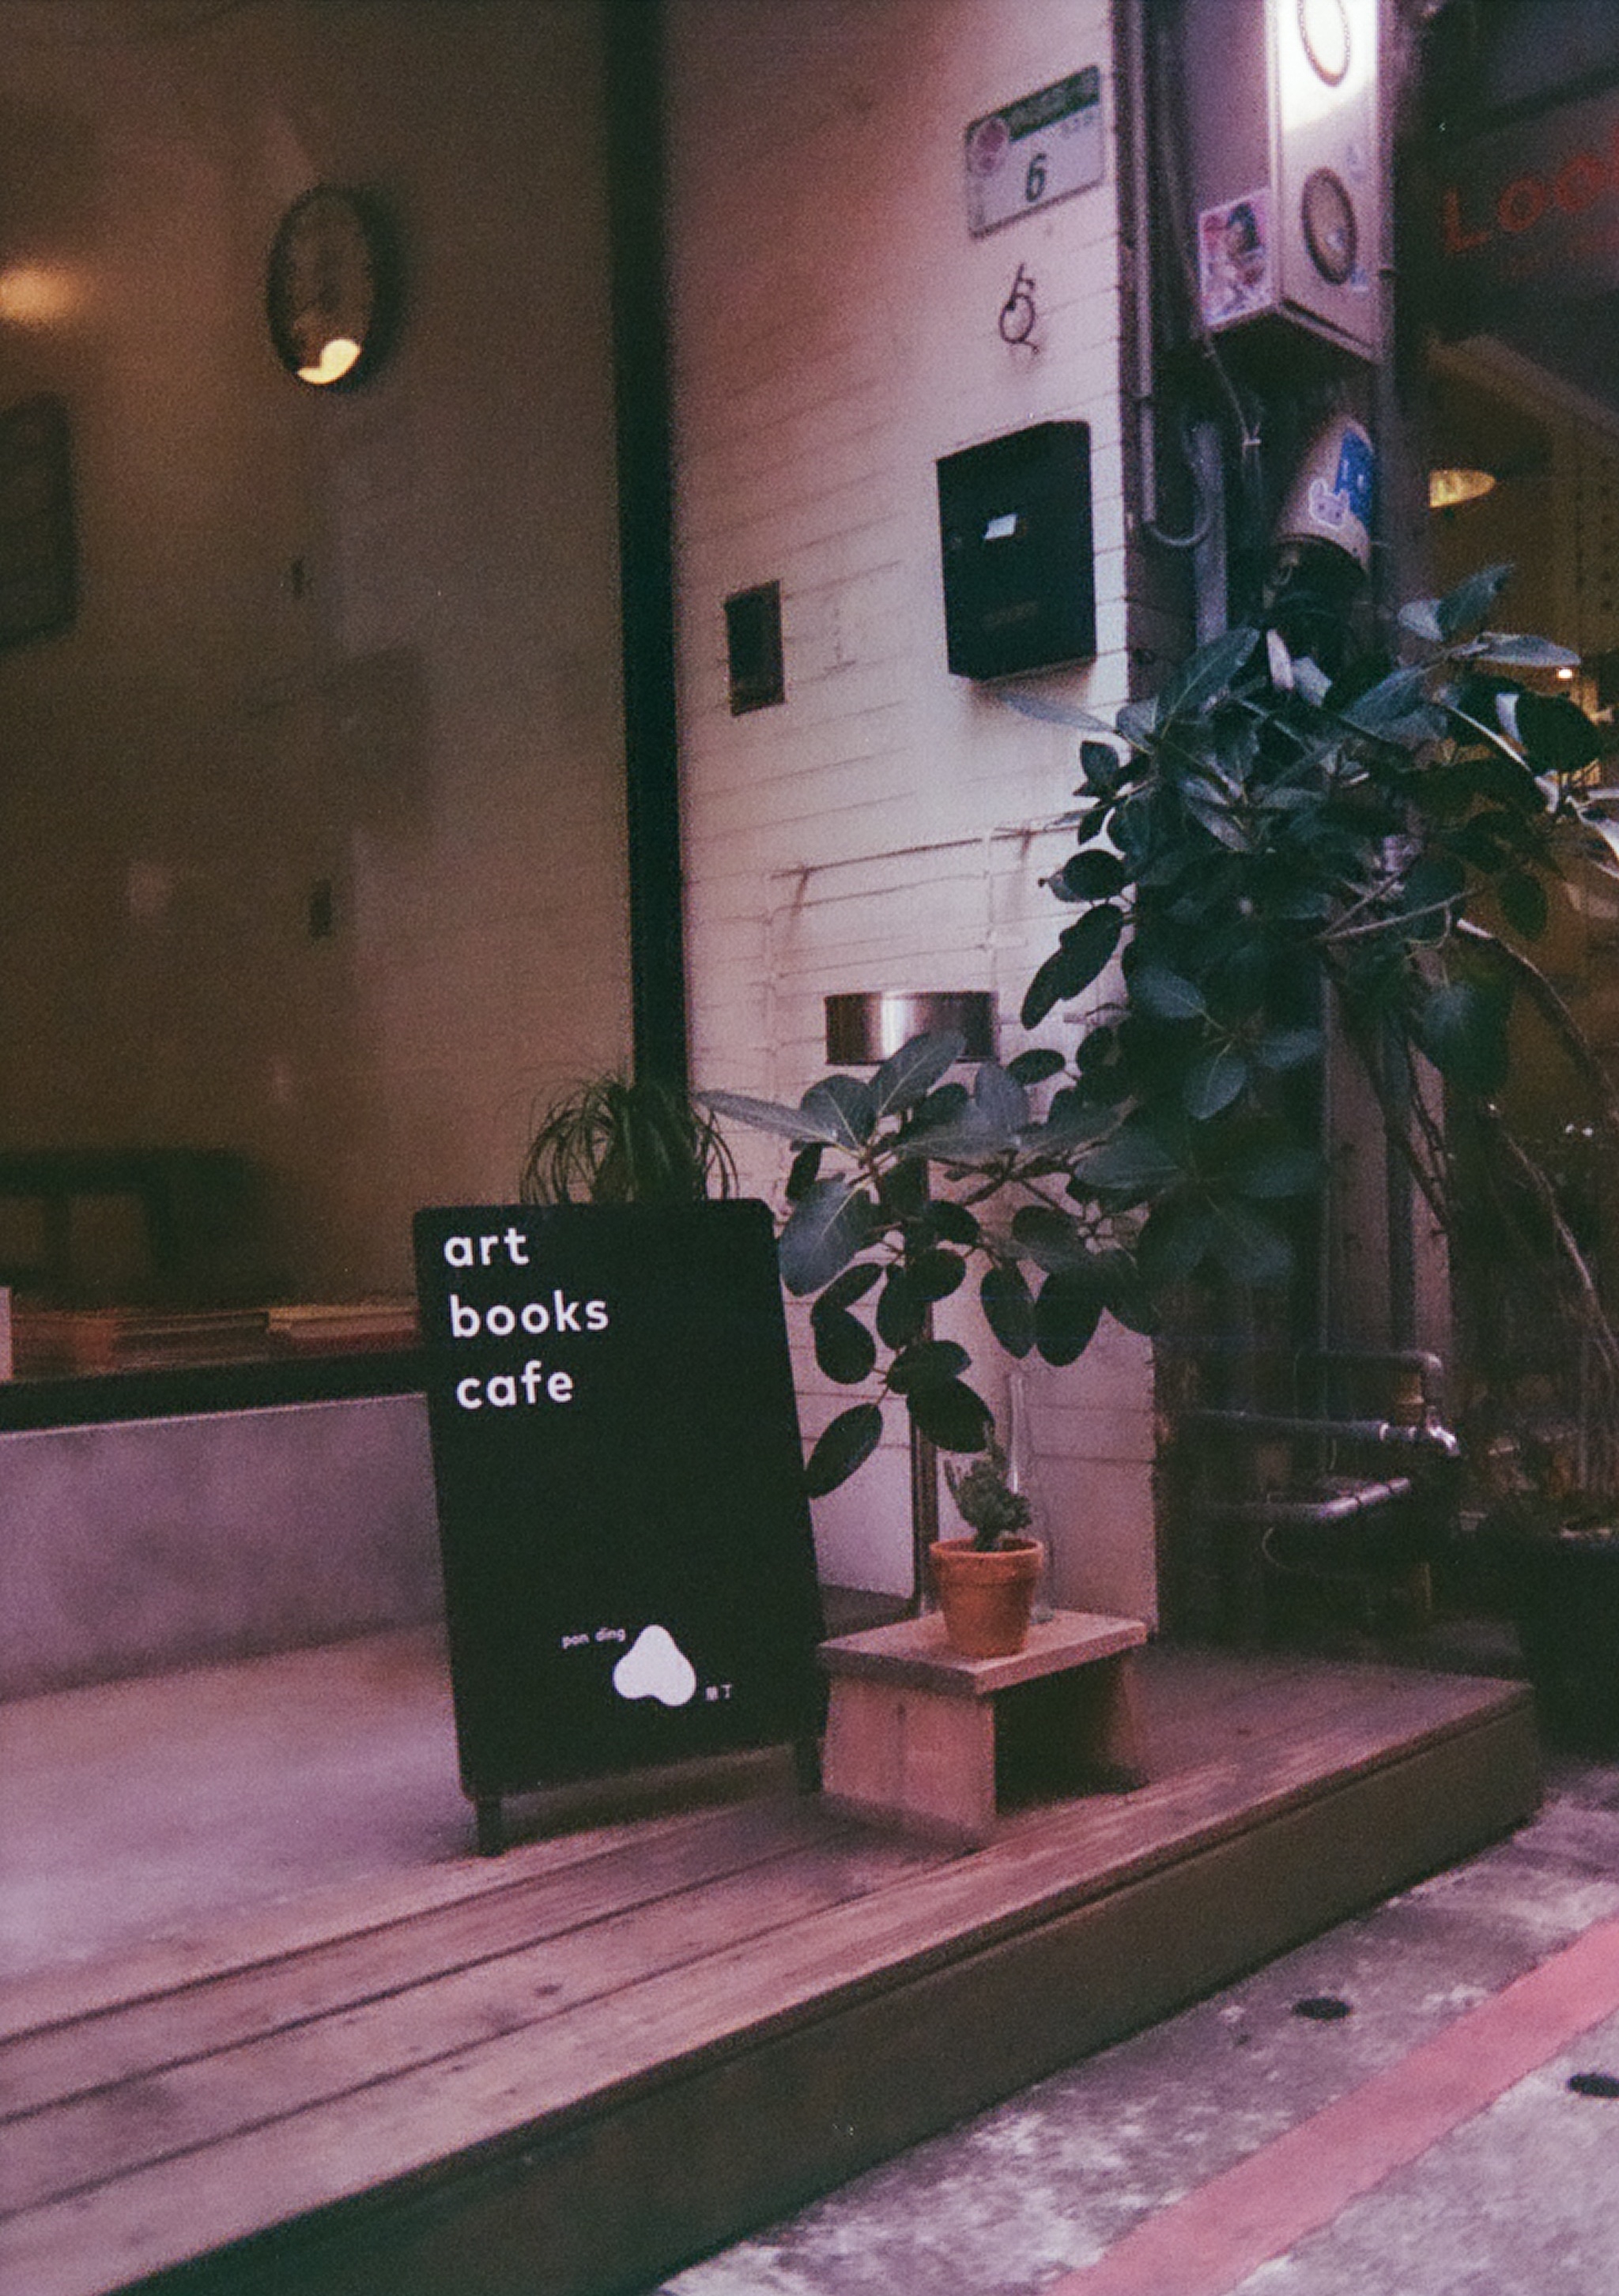 A black and white floor shop sign that says art, books, cafe, pon ding